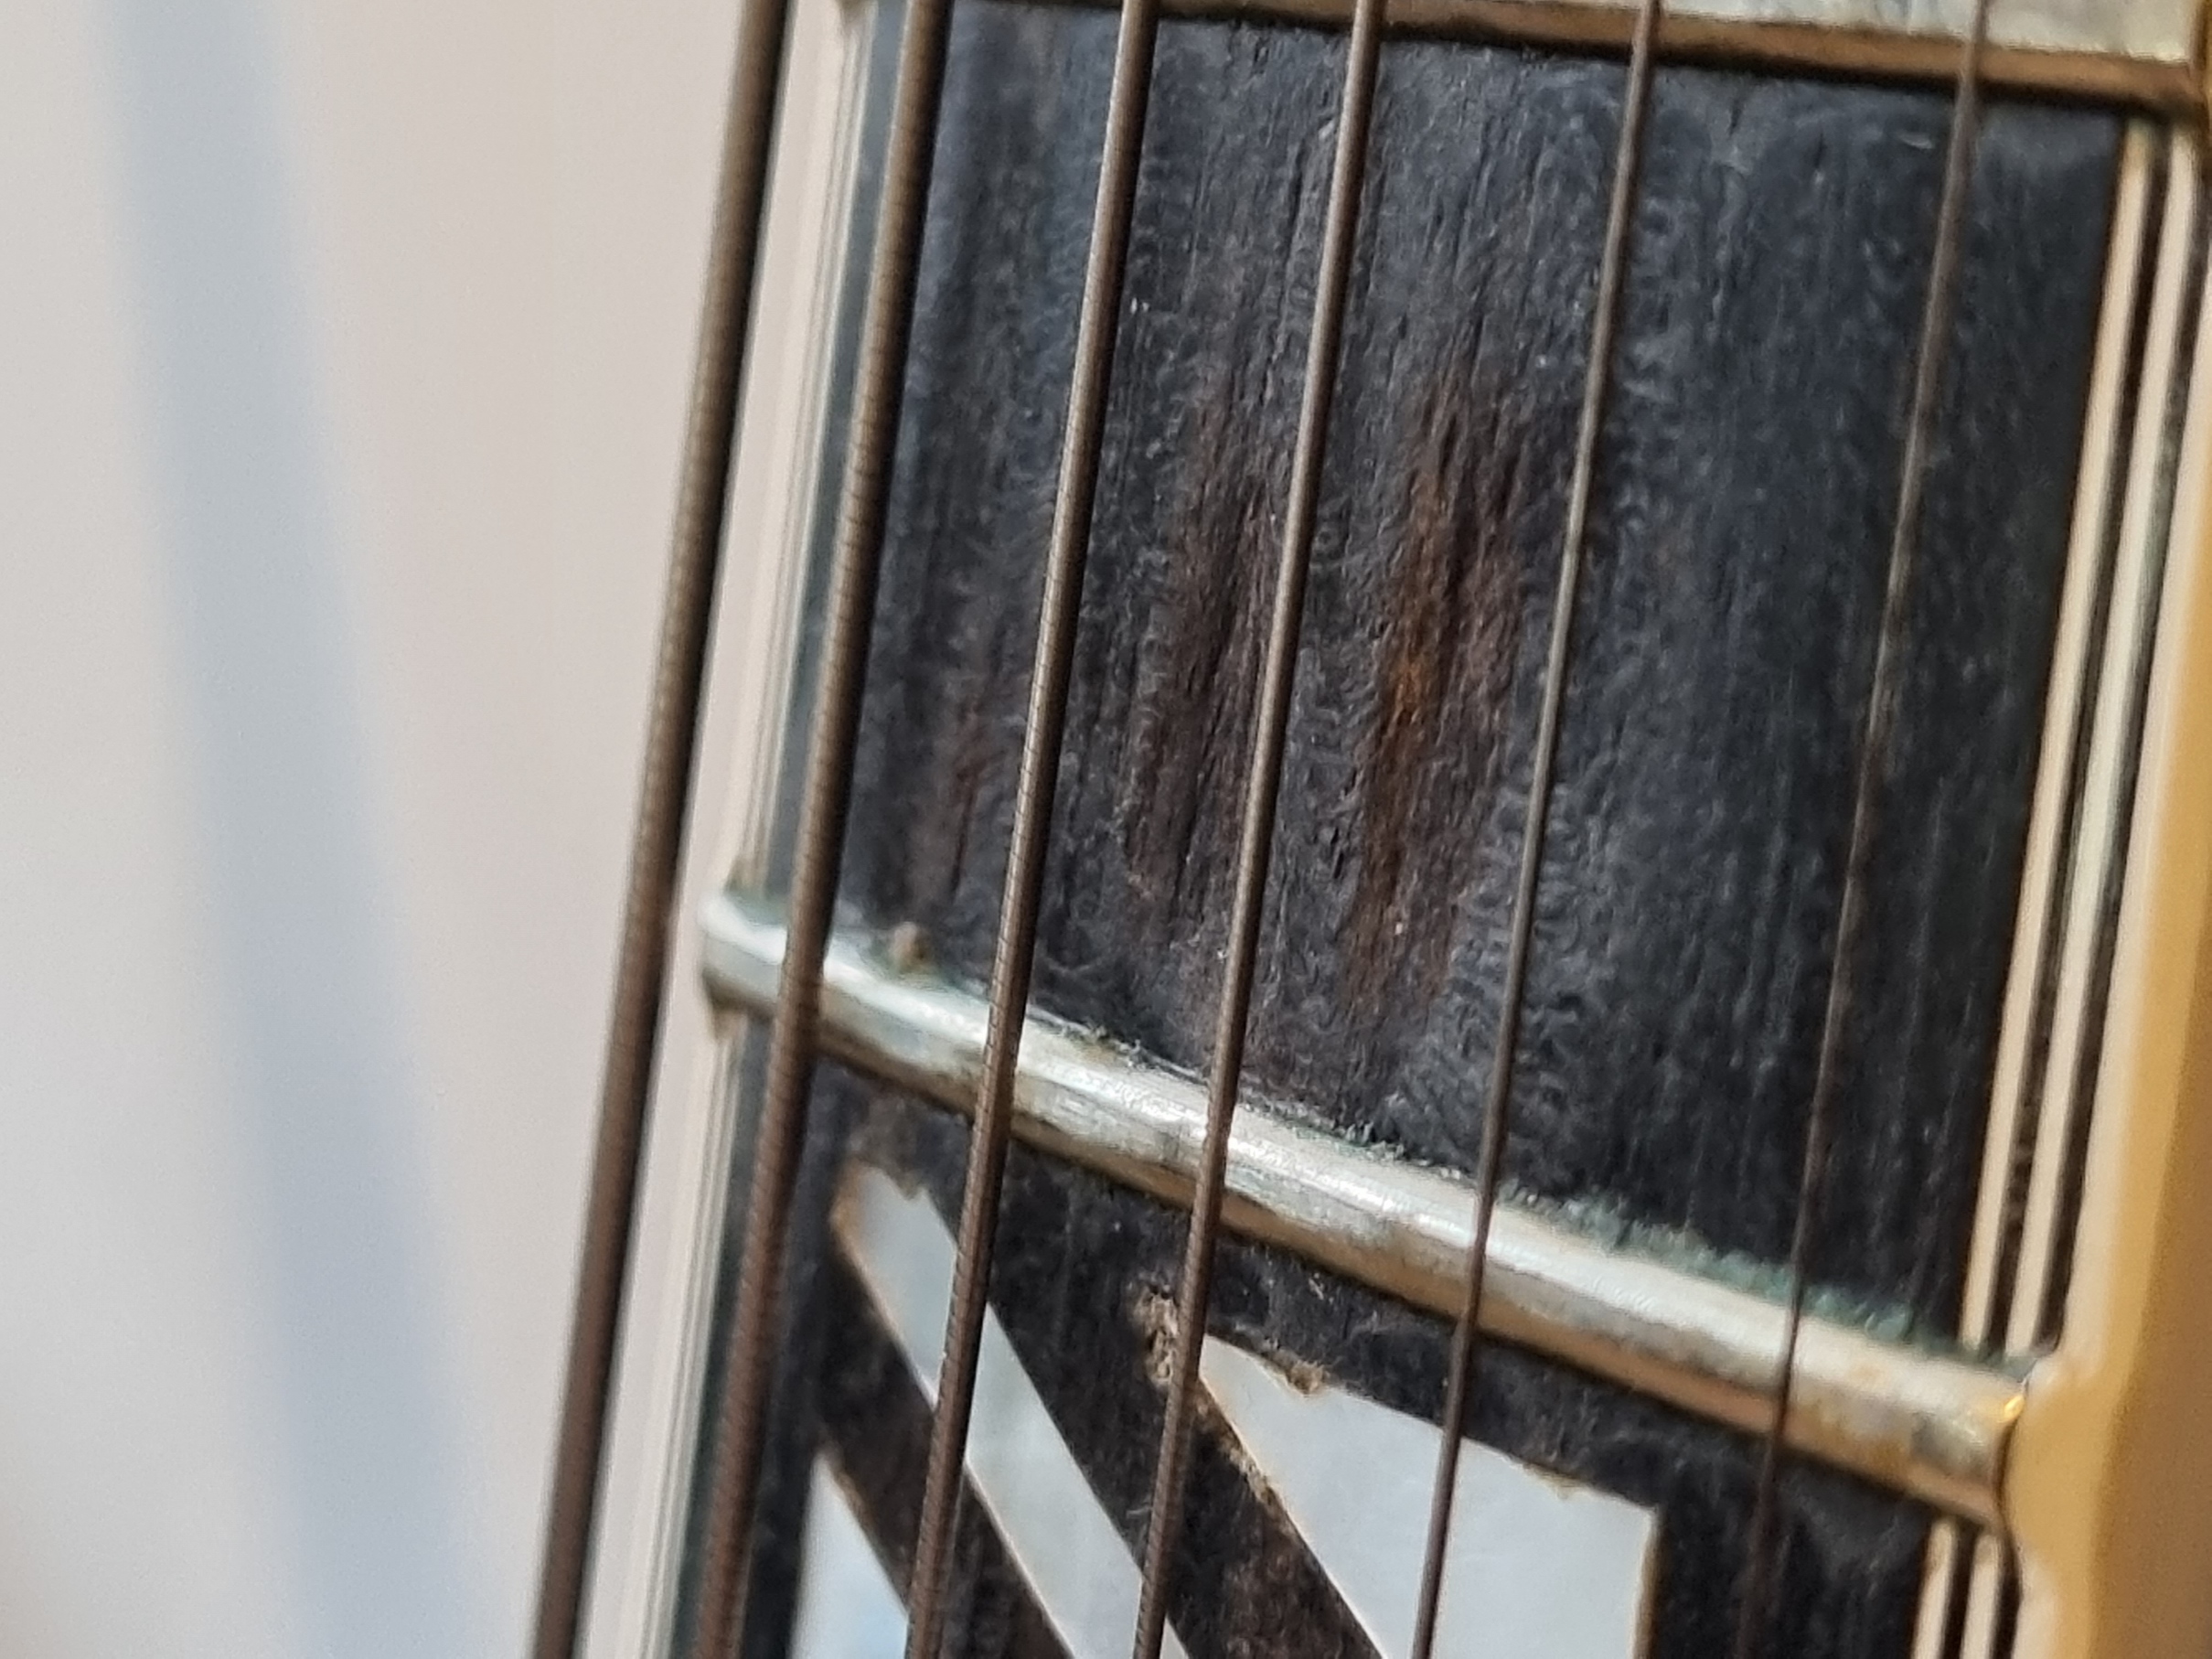 Fretboard pitting - What's the deal?-20210913_180034-jpg